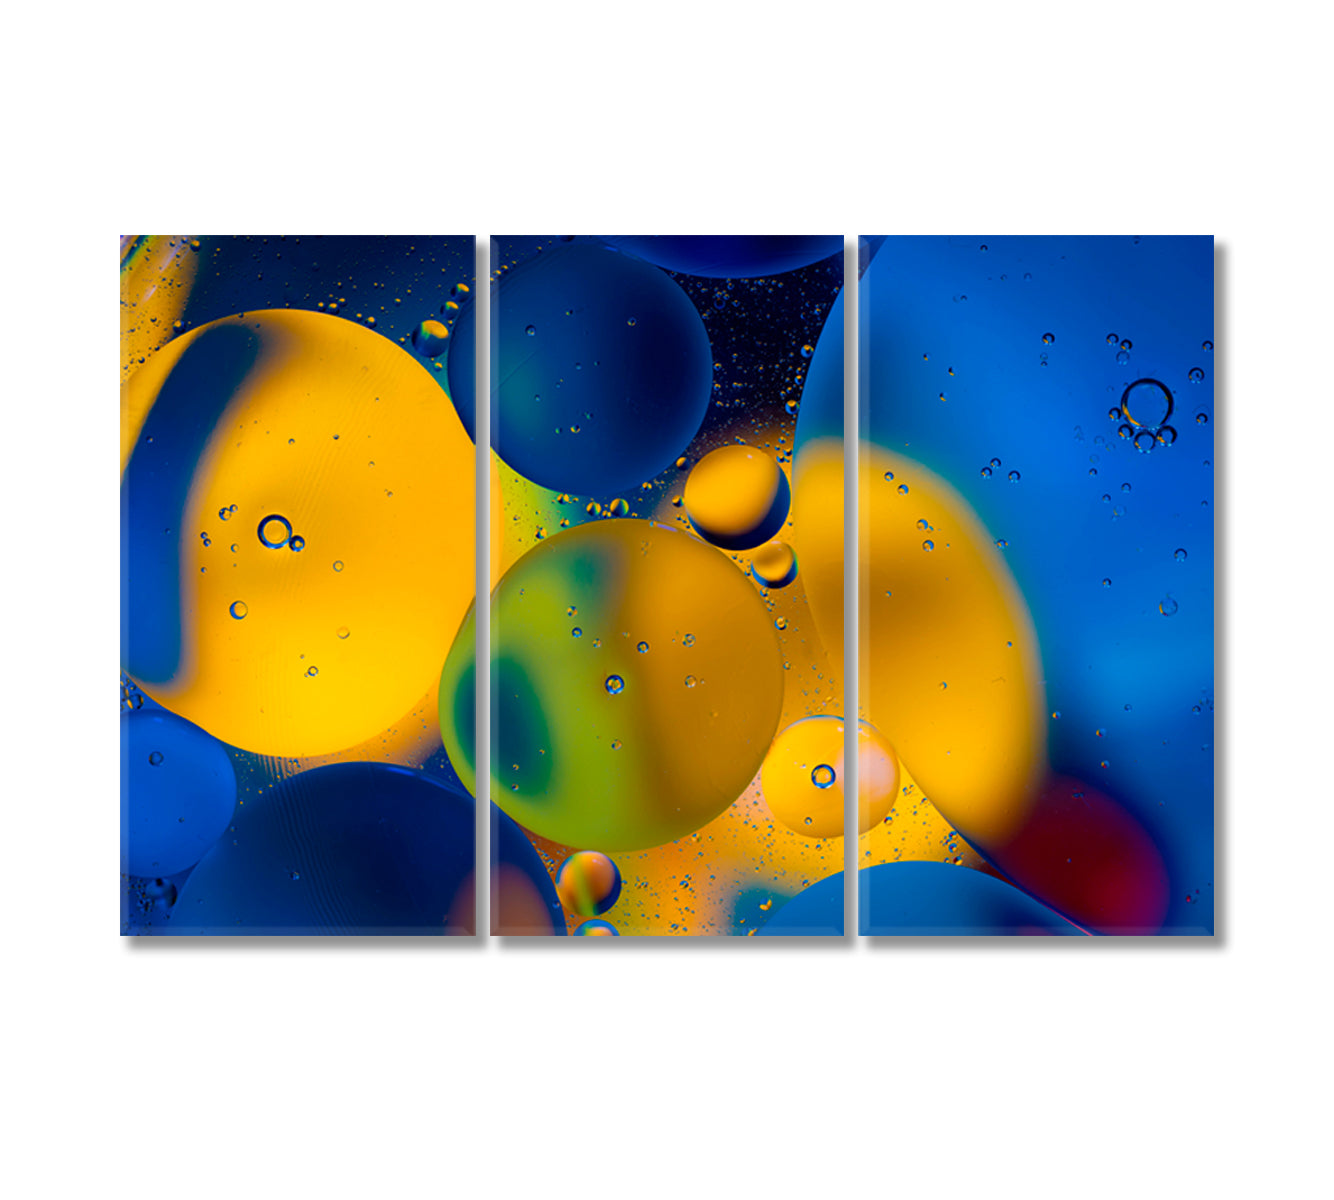 Colorful Abstract Glowing Bubbles Canvas Print-Canvas Print-CetArt-3 Panels-36x24 inches-CetArt